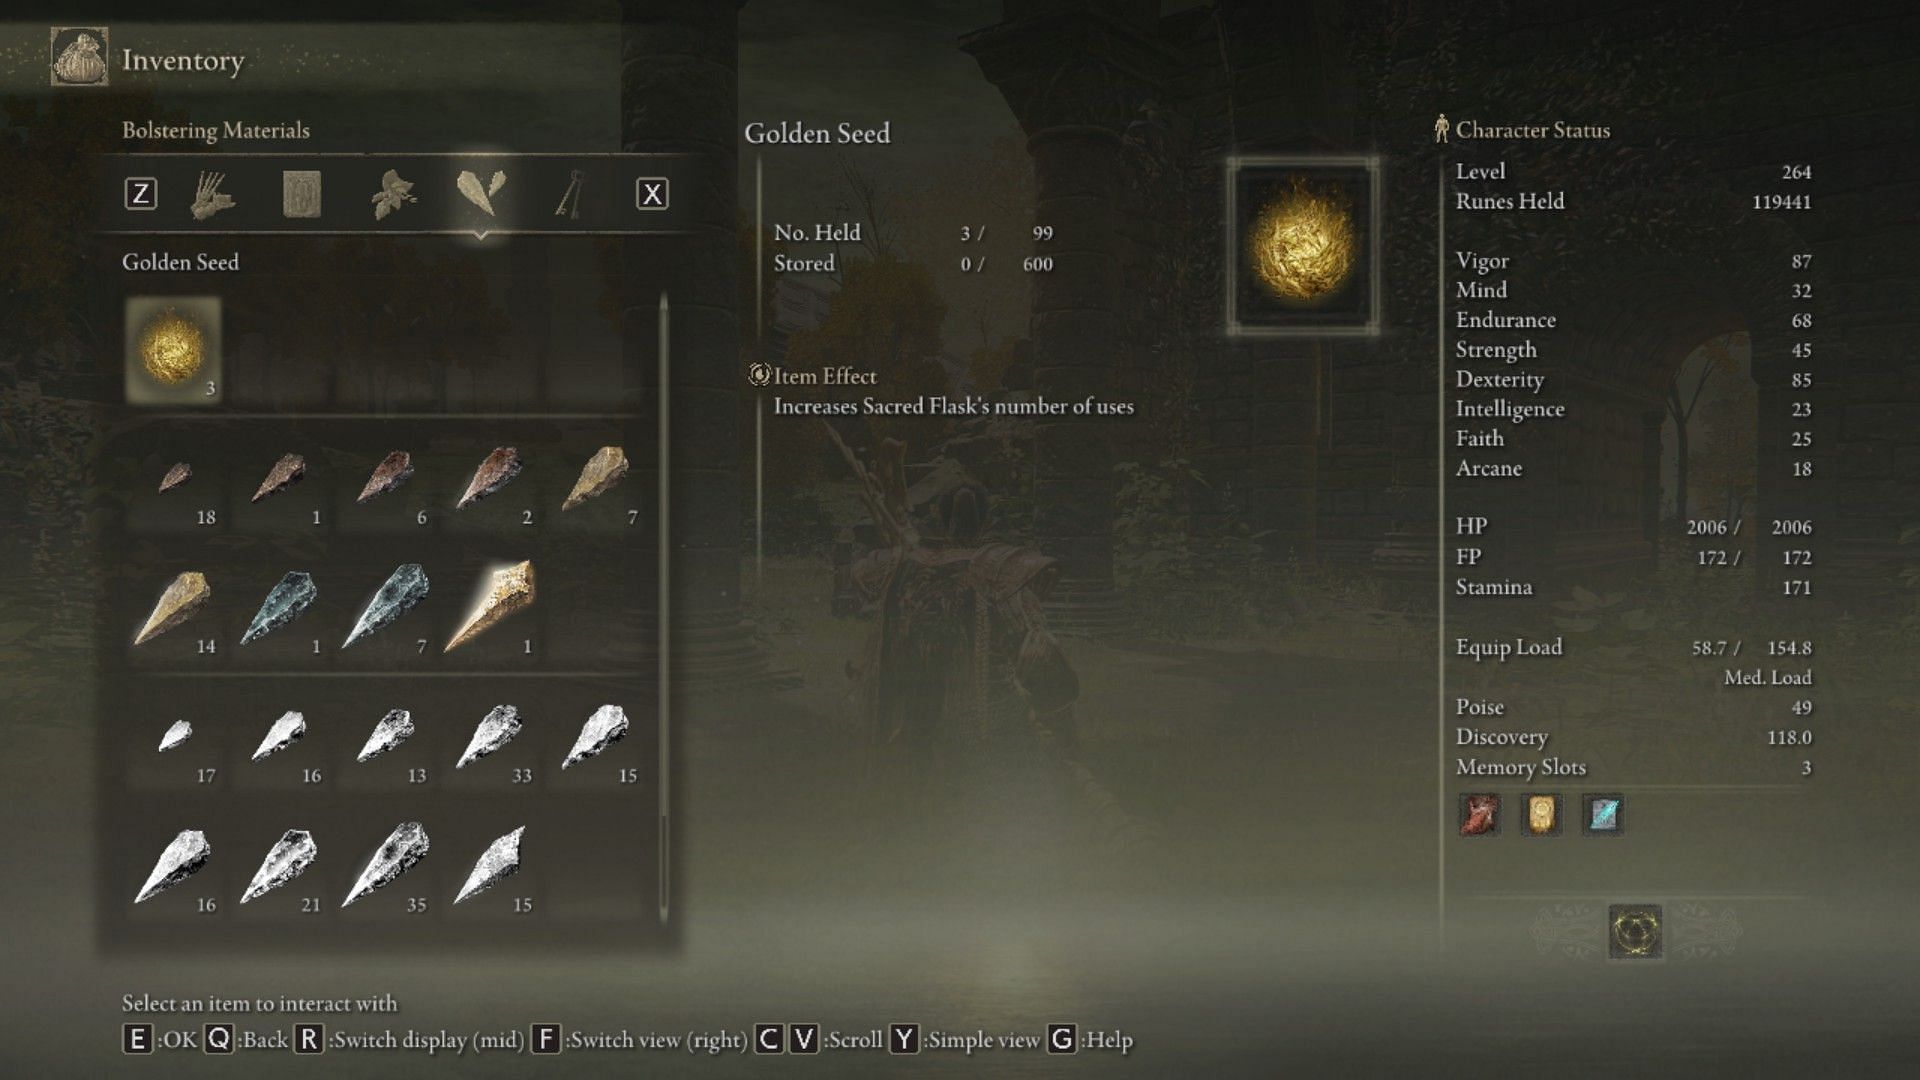 Golden Seed can allow players to obtain one extra health flask in the early game (Image via Elden Ring)